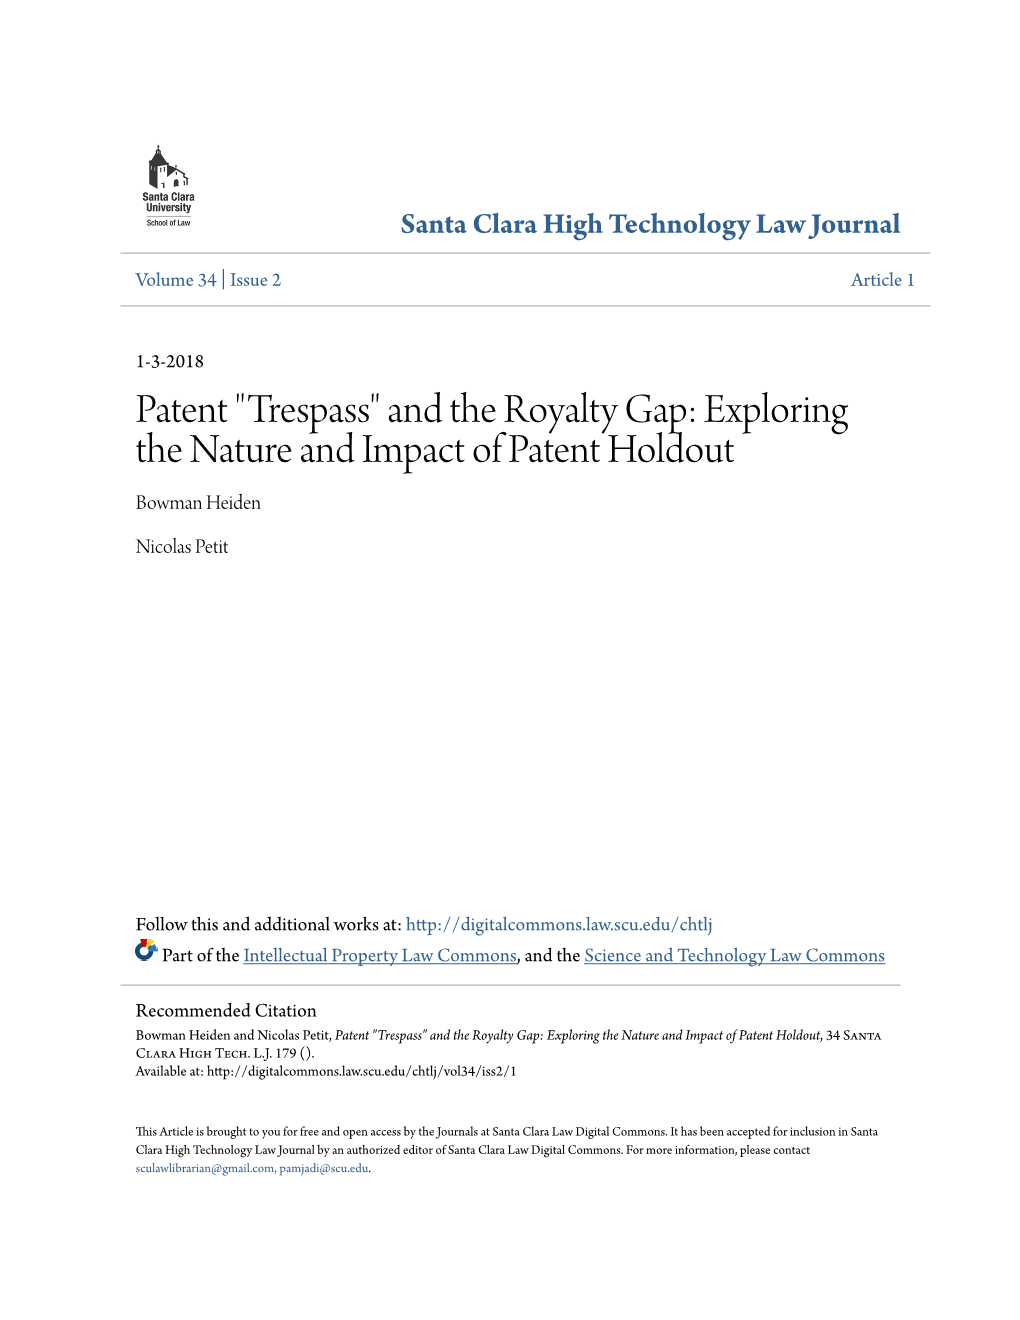 Patent "Trespass" and the Royalty Gap: Exploring the Nature and Impact of Patent Holdout Bowman Heiden